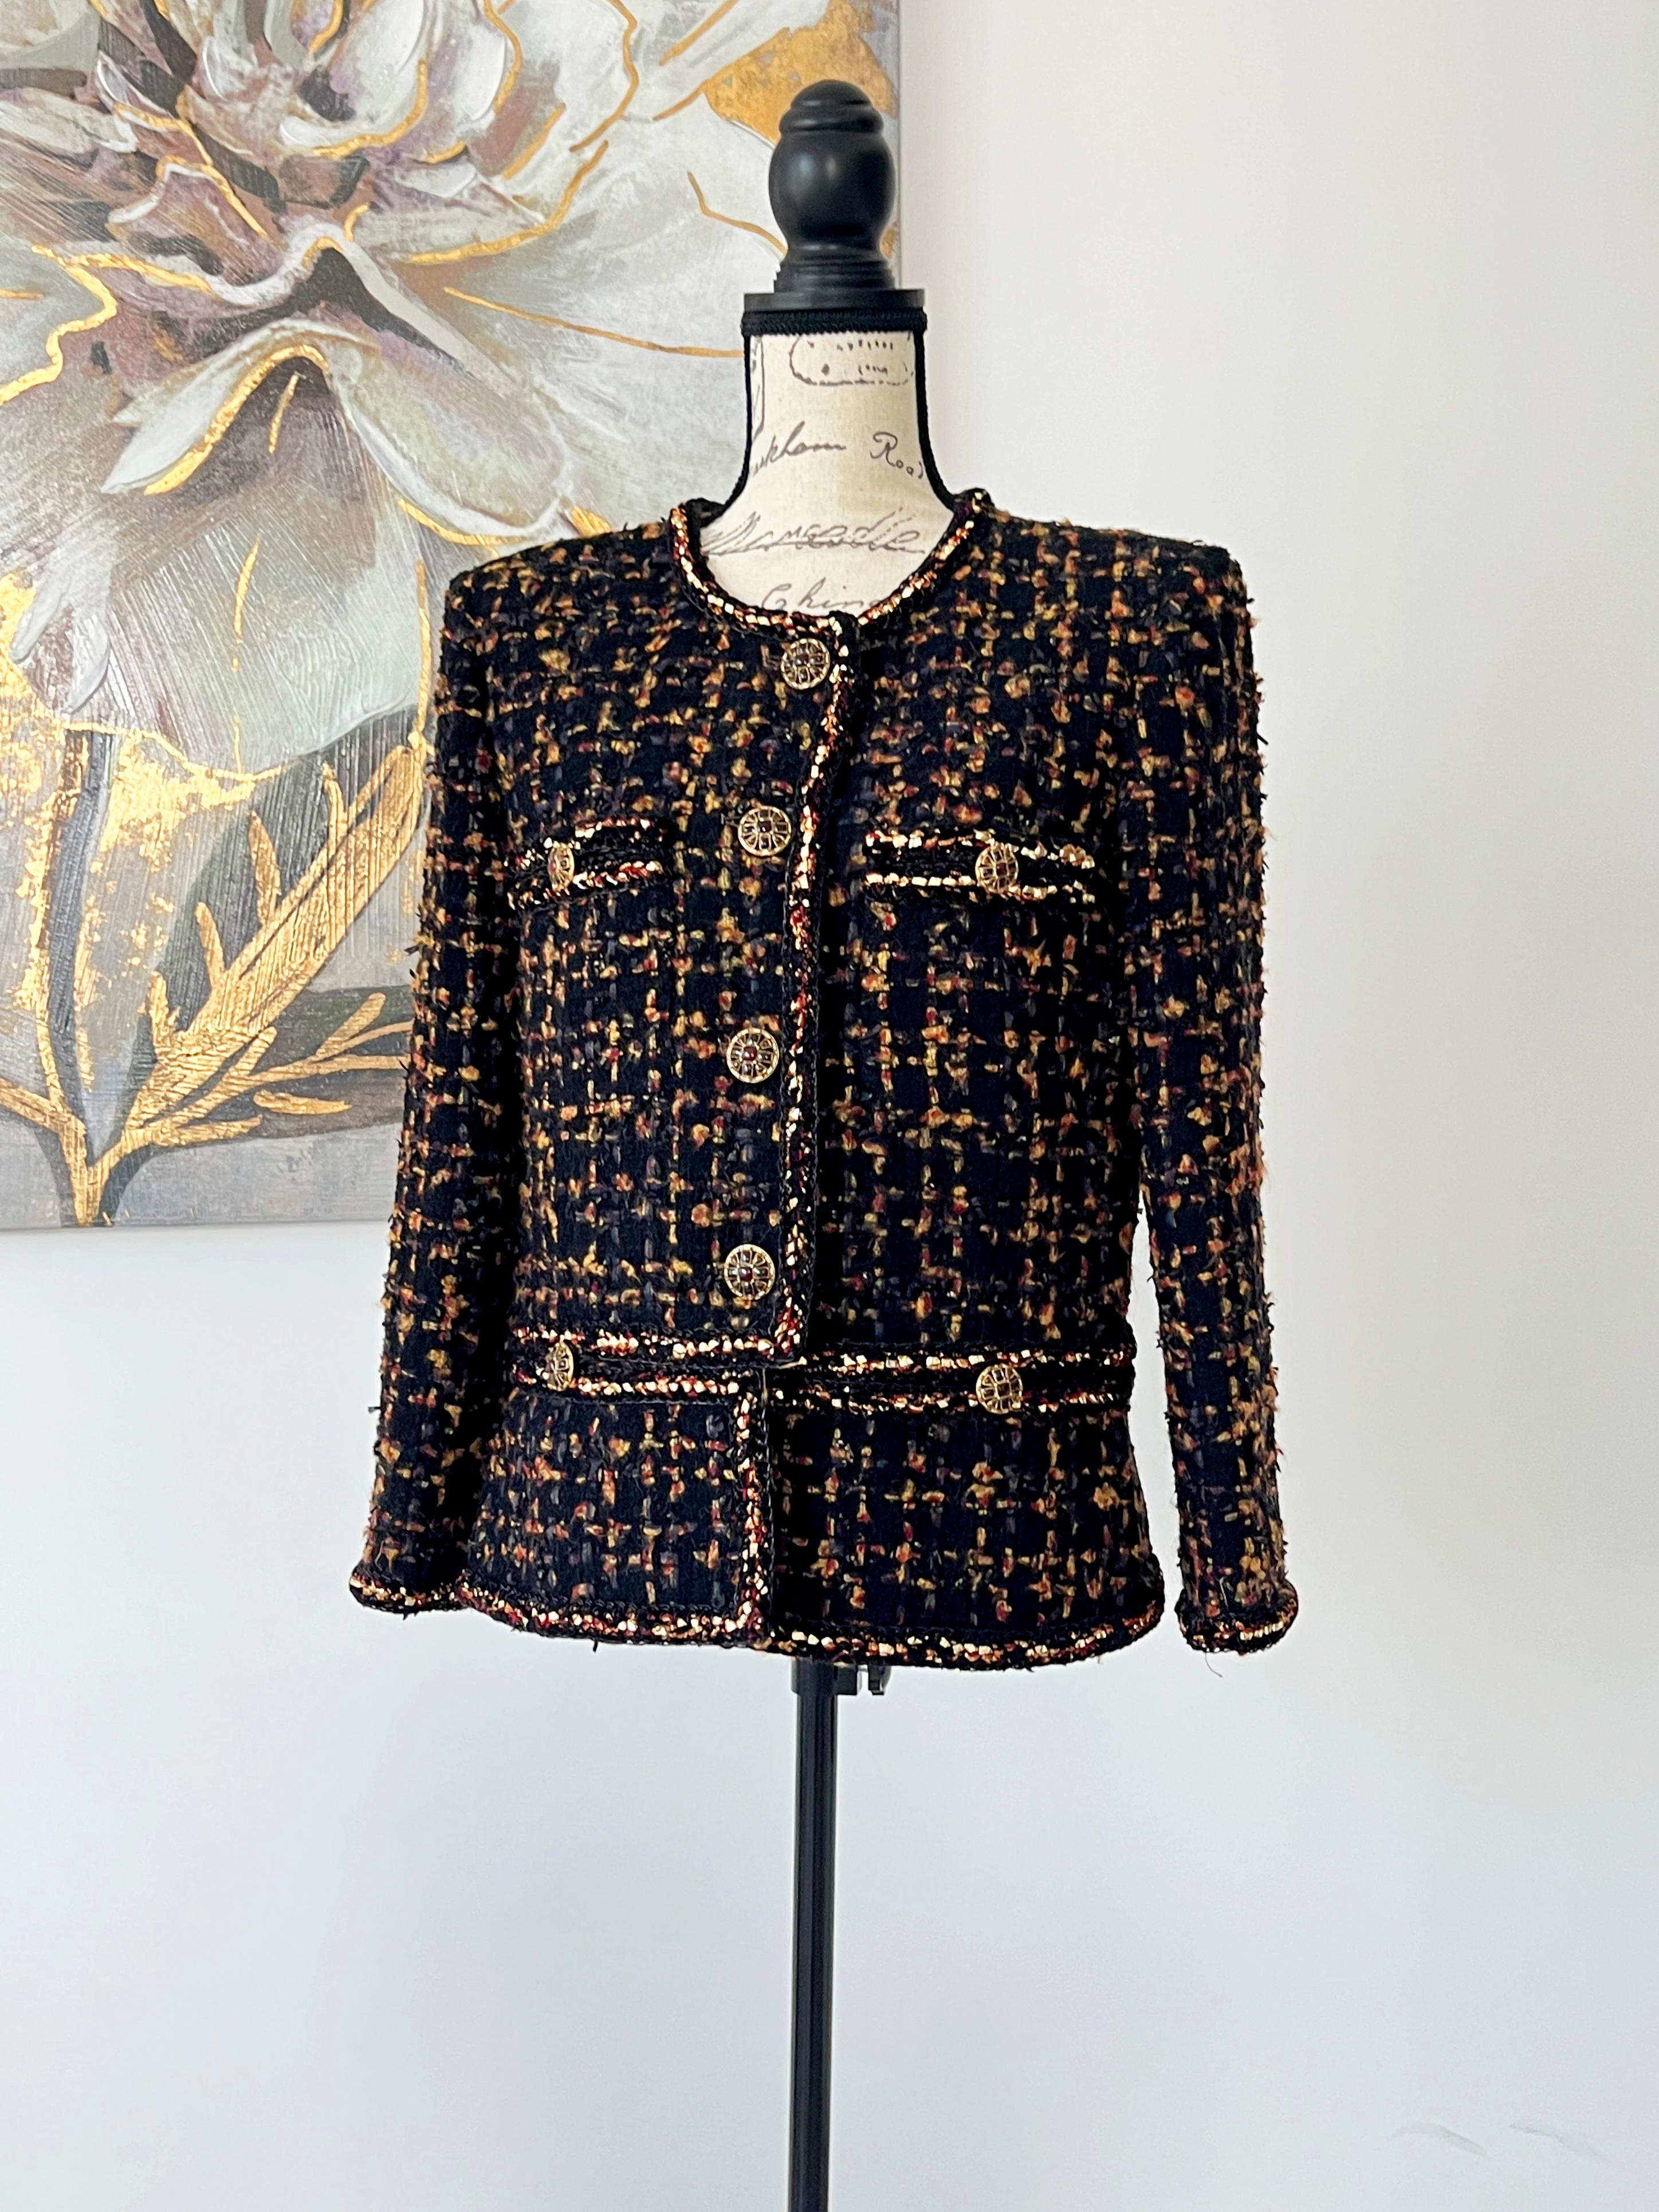 Chanel New-York Collection Black Tweed Jacket, 2019 For Sale 7